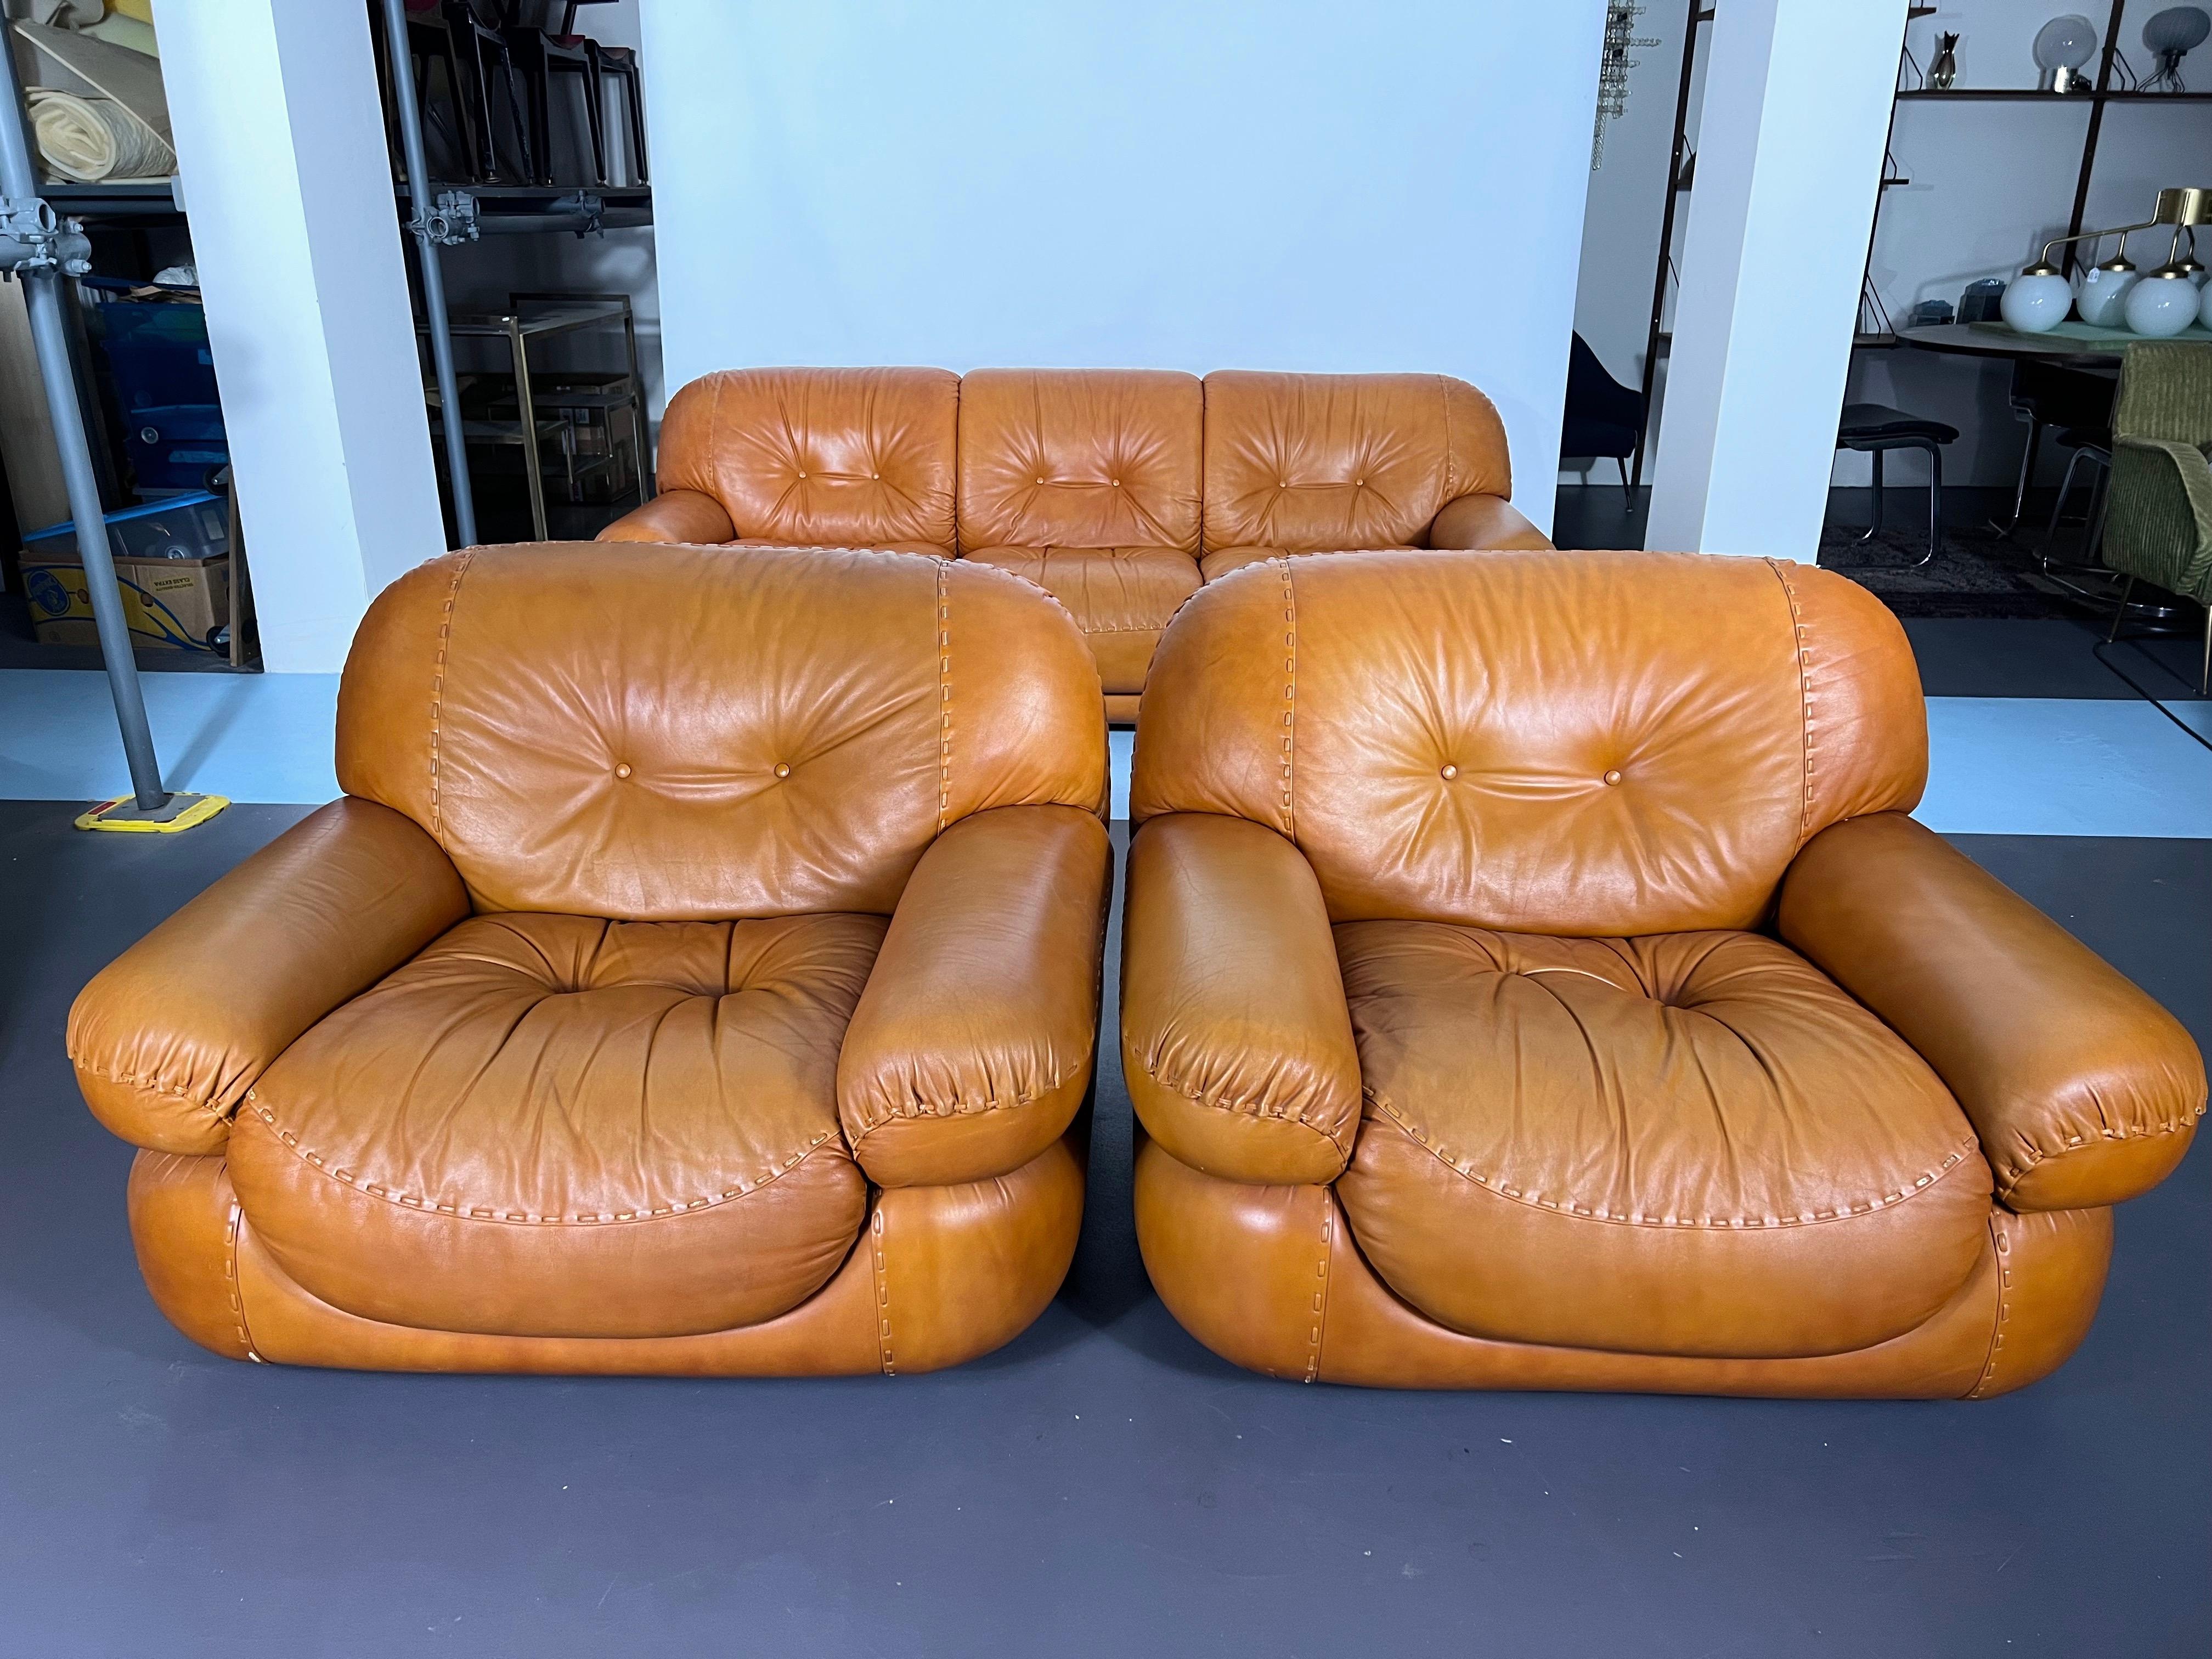 Vintage Sofa Set in Cognac Leather by Sapporo for Mobil Girgi, Italy, 1970s For Sale 6